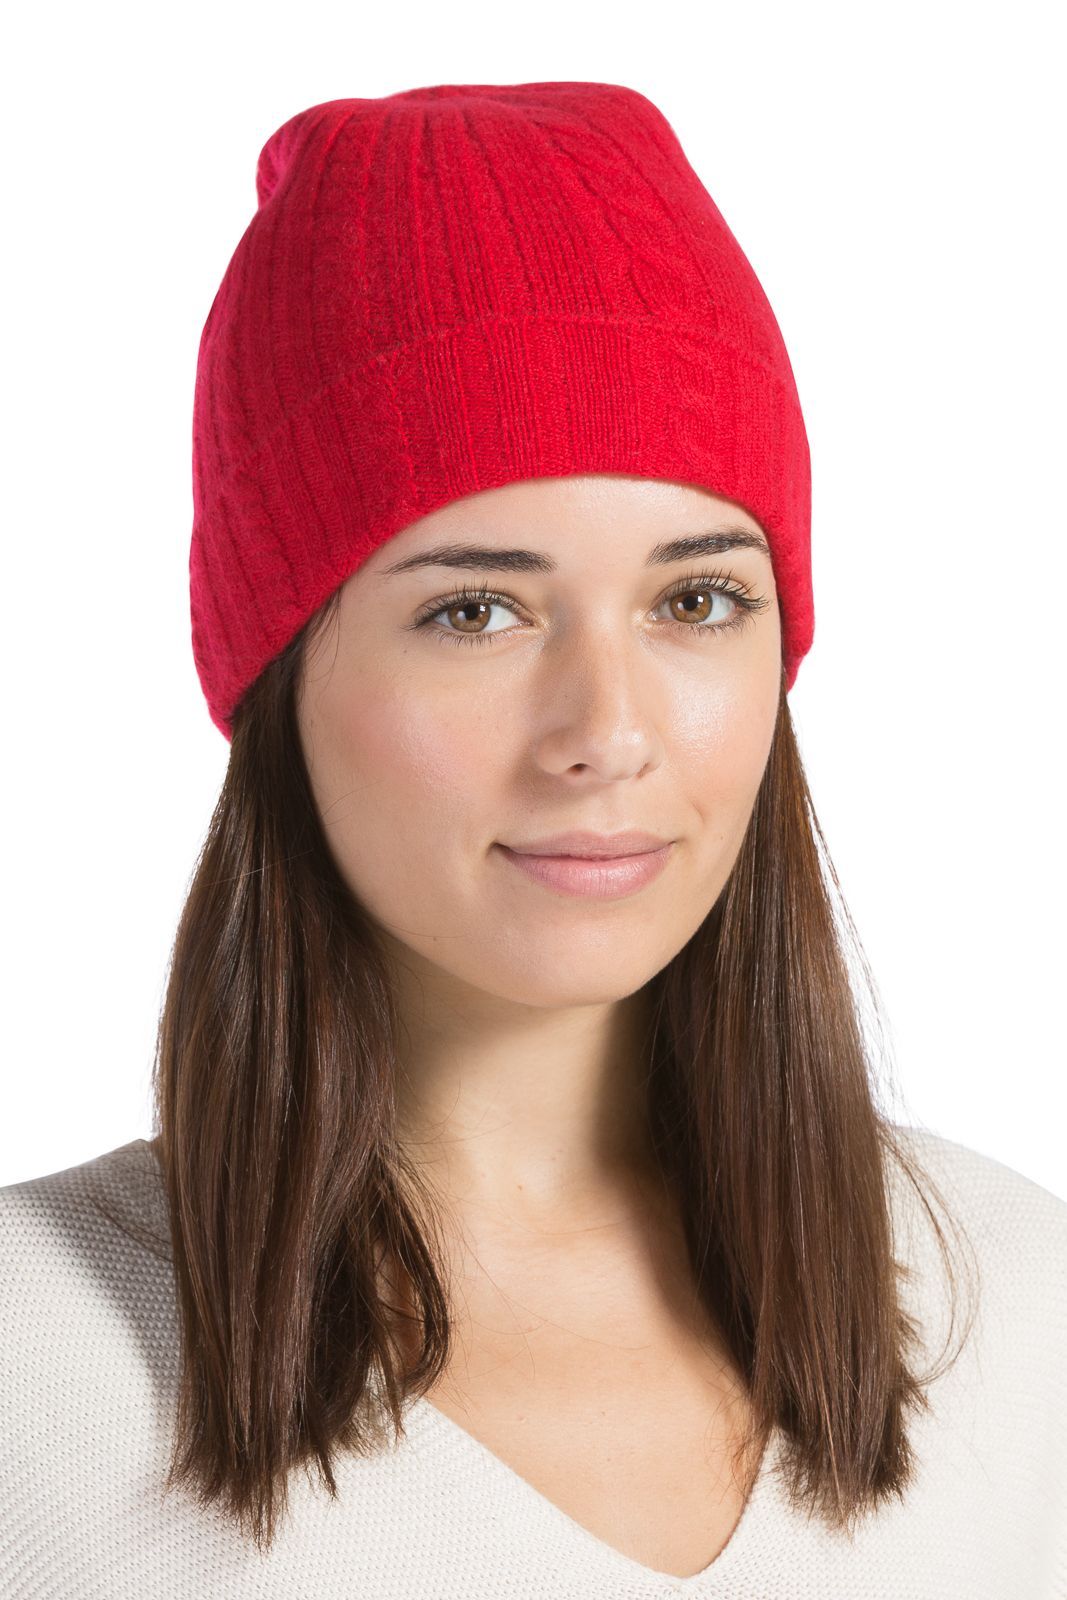 Women's 100% Pure Cashmere Cable Knit Hat Womens>Accessories>Hat Fishers Finery Cardinal Red One Size 